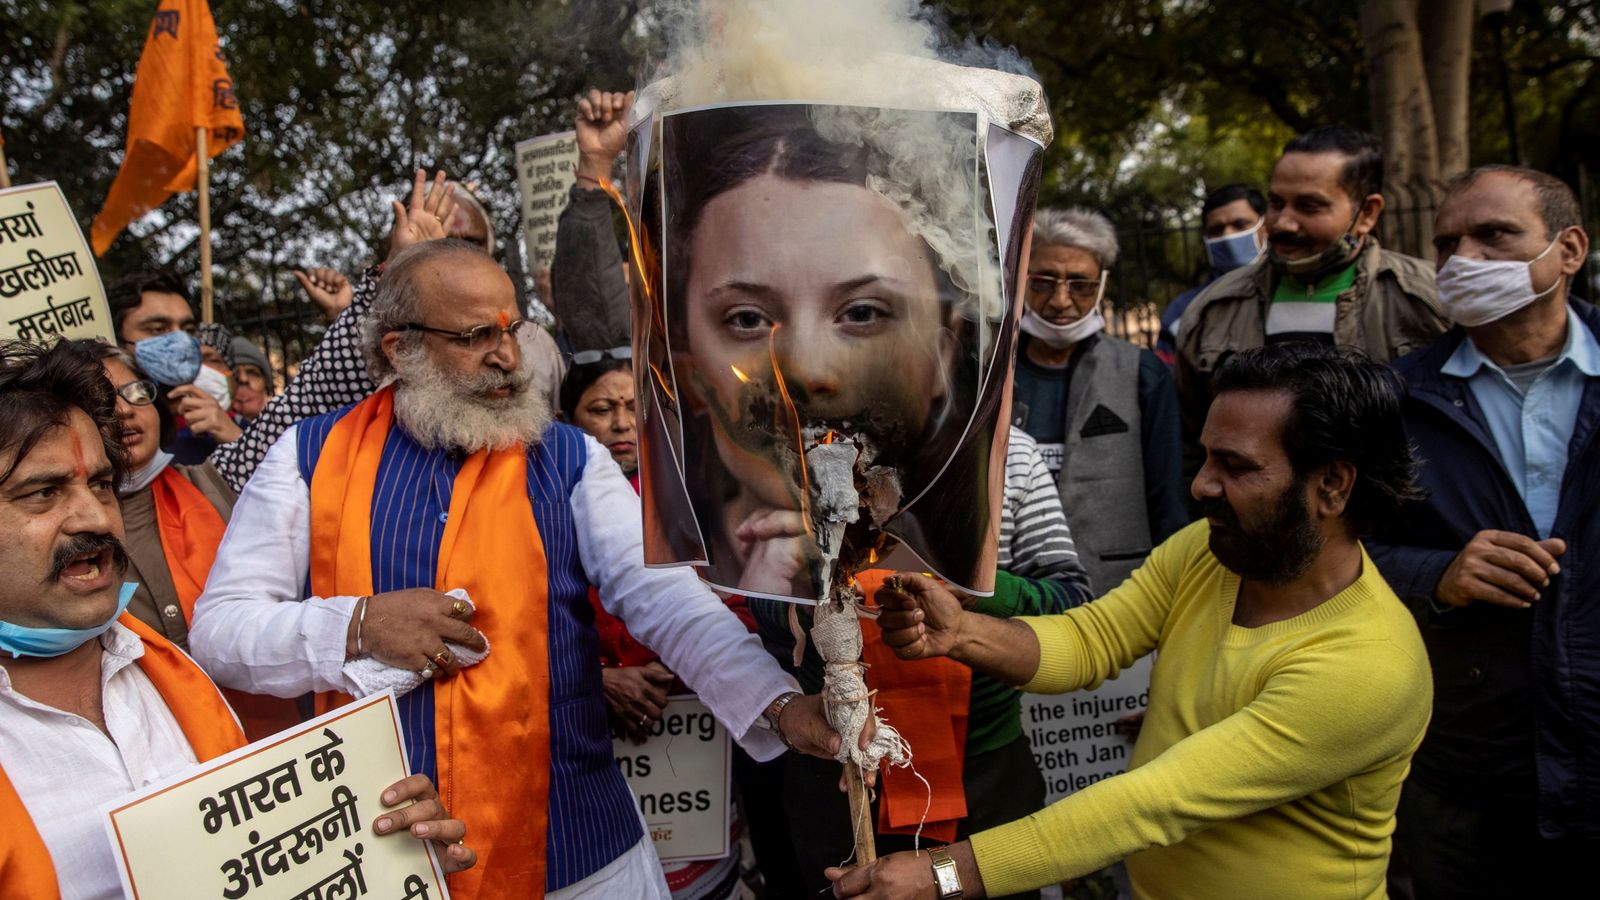 Indian farmers' protest: Activists burn photos of Greta Thunberg over her support for demonstrators